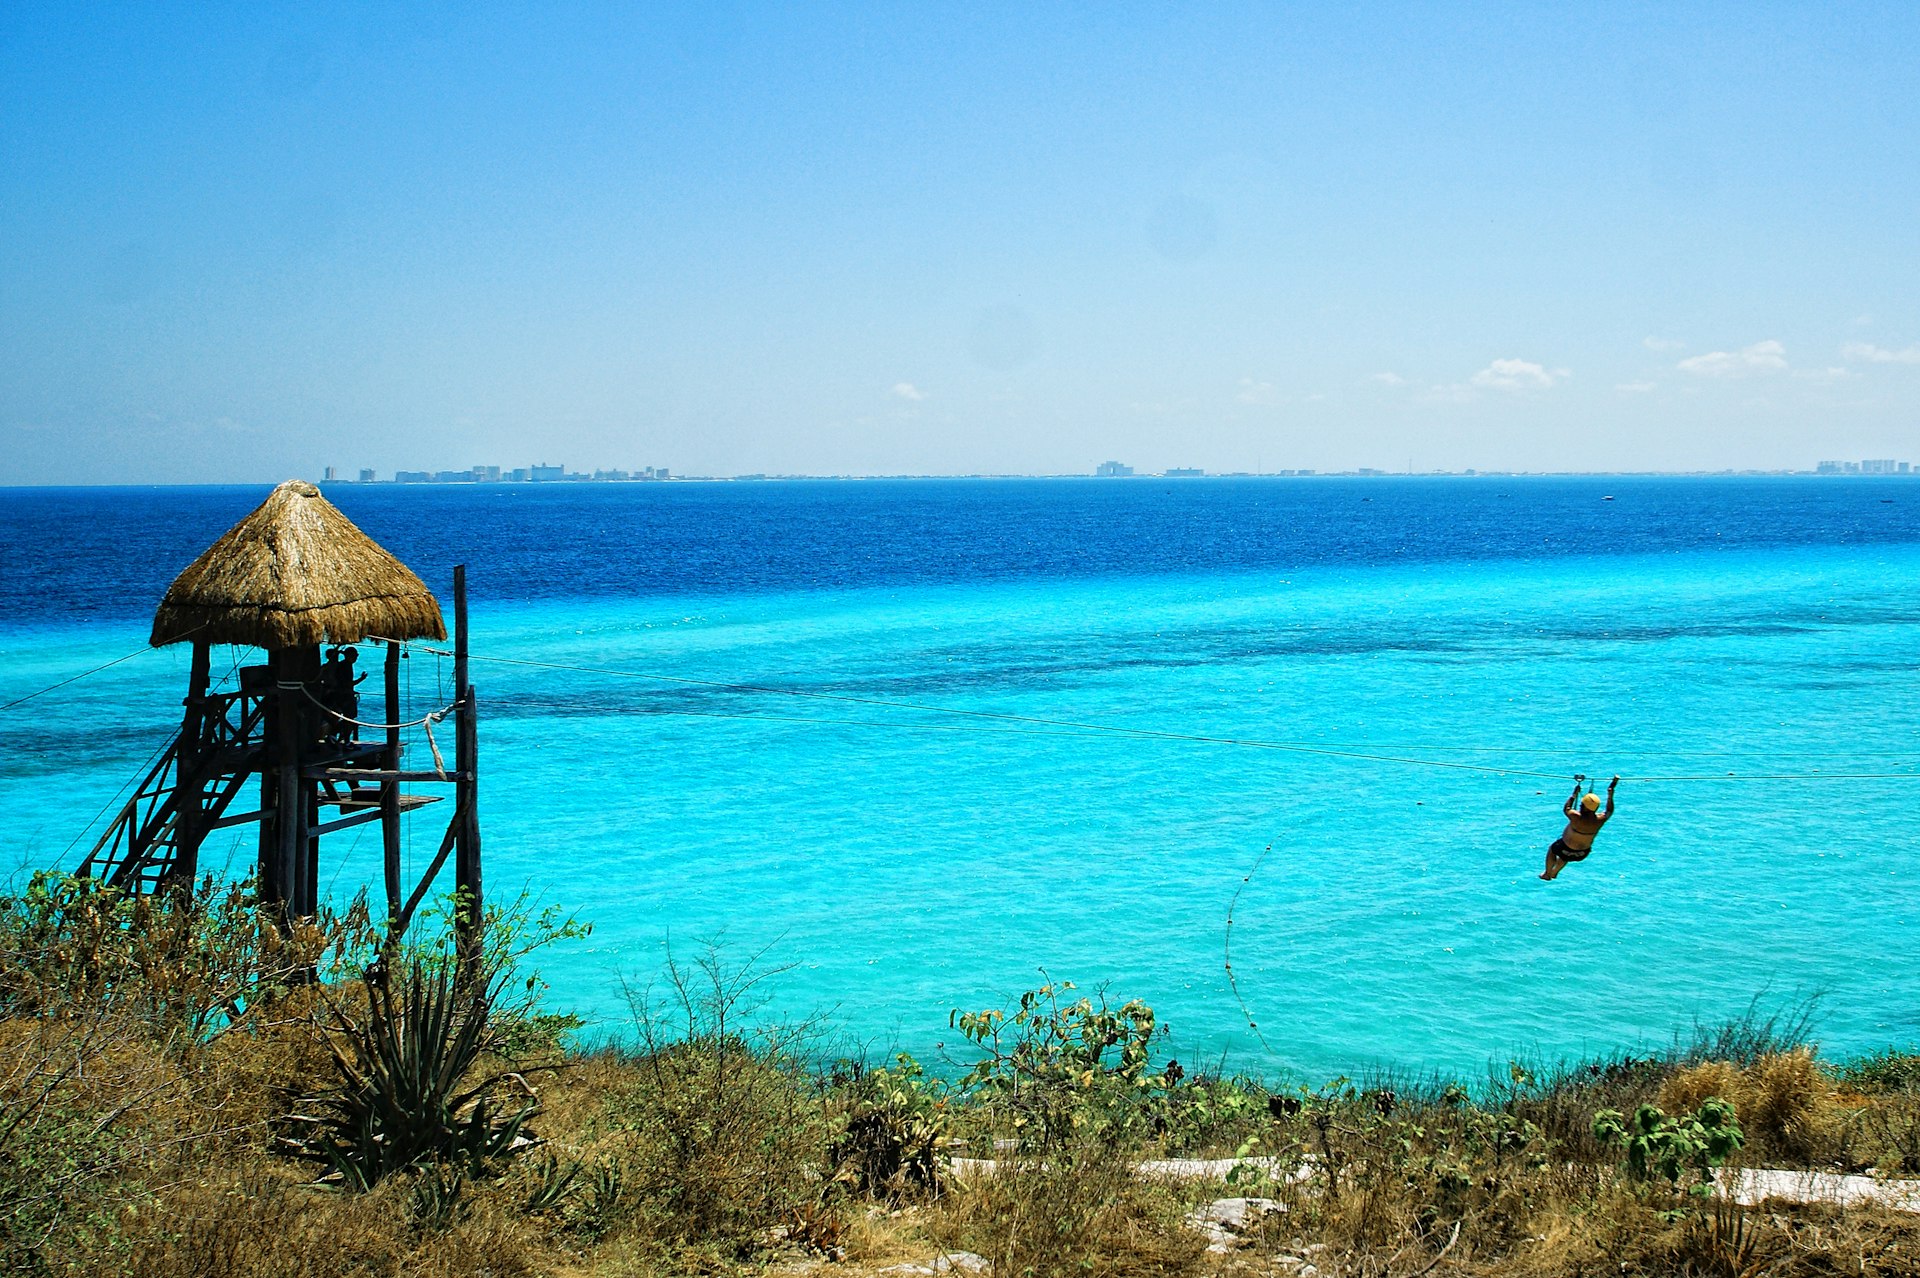 A person ziplines over the Caribbean Sea on Isla Mujeres with Cancún in the background © Infinite Highway / Getty Images